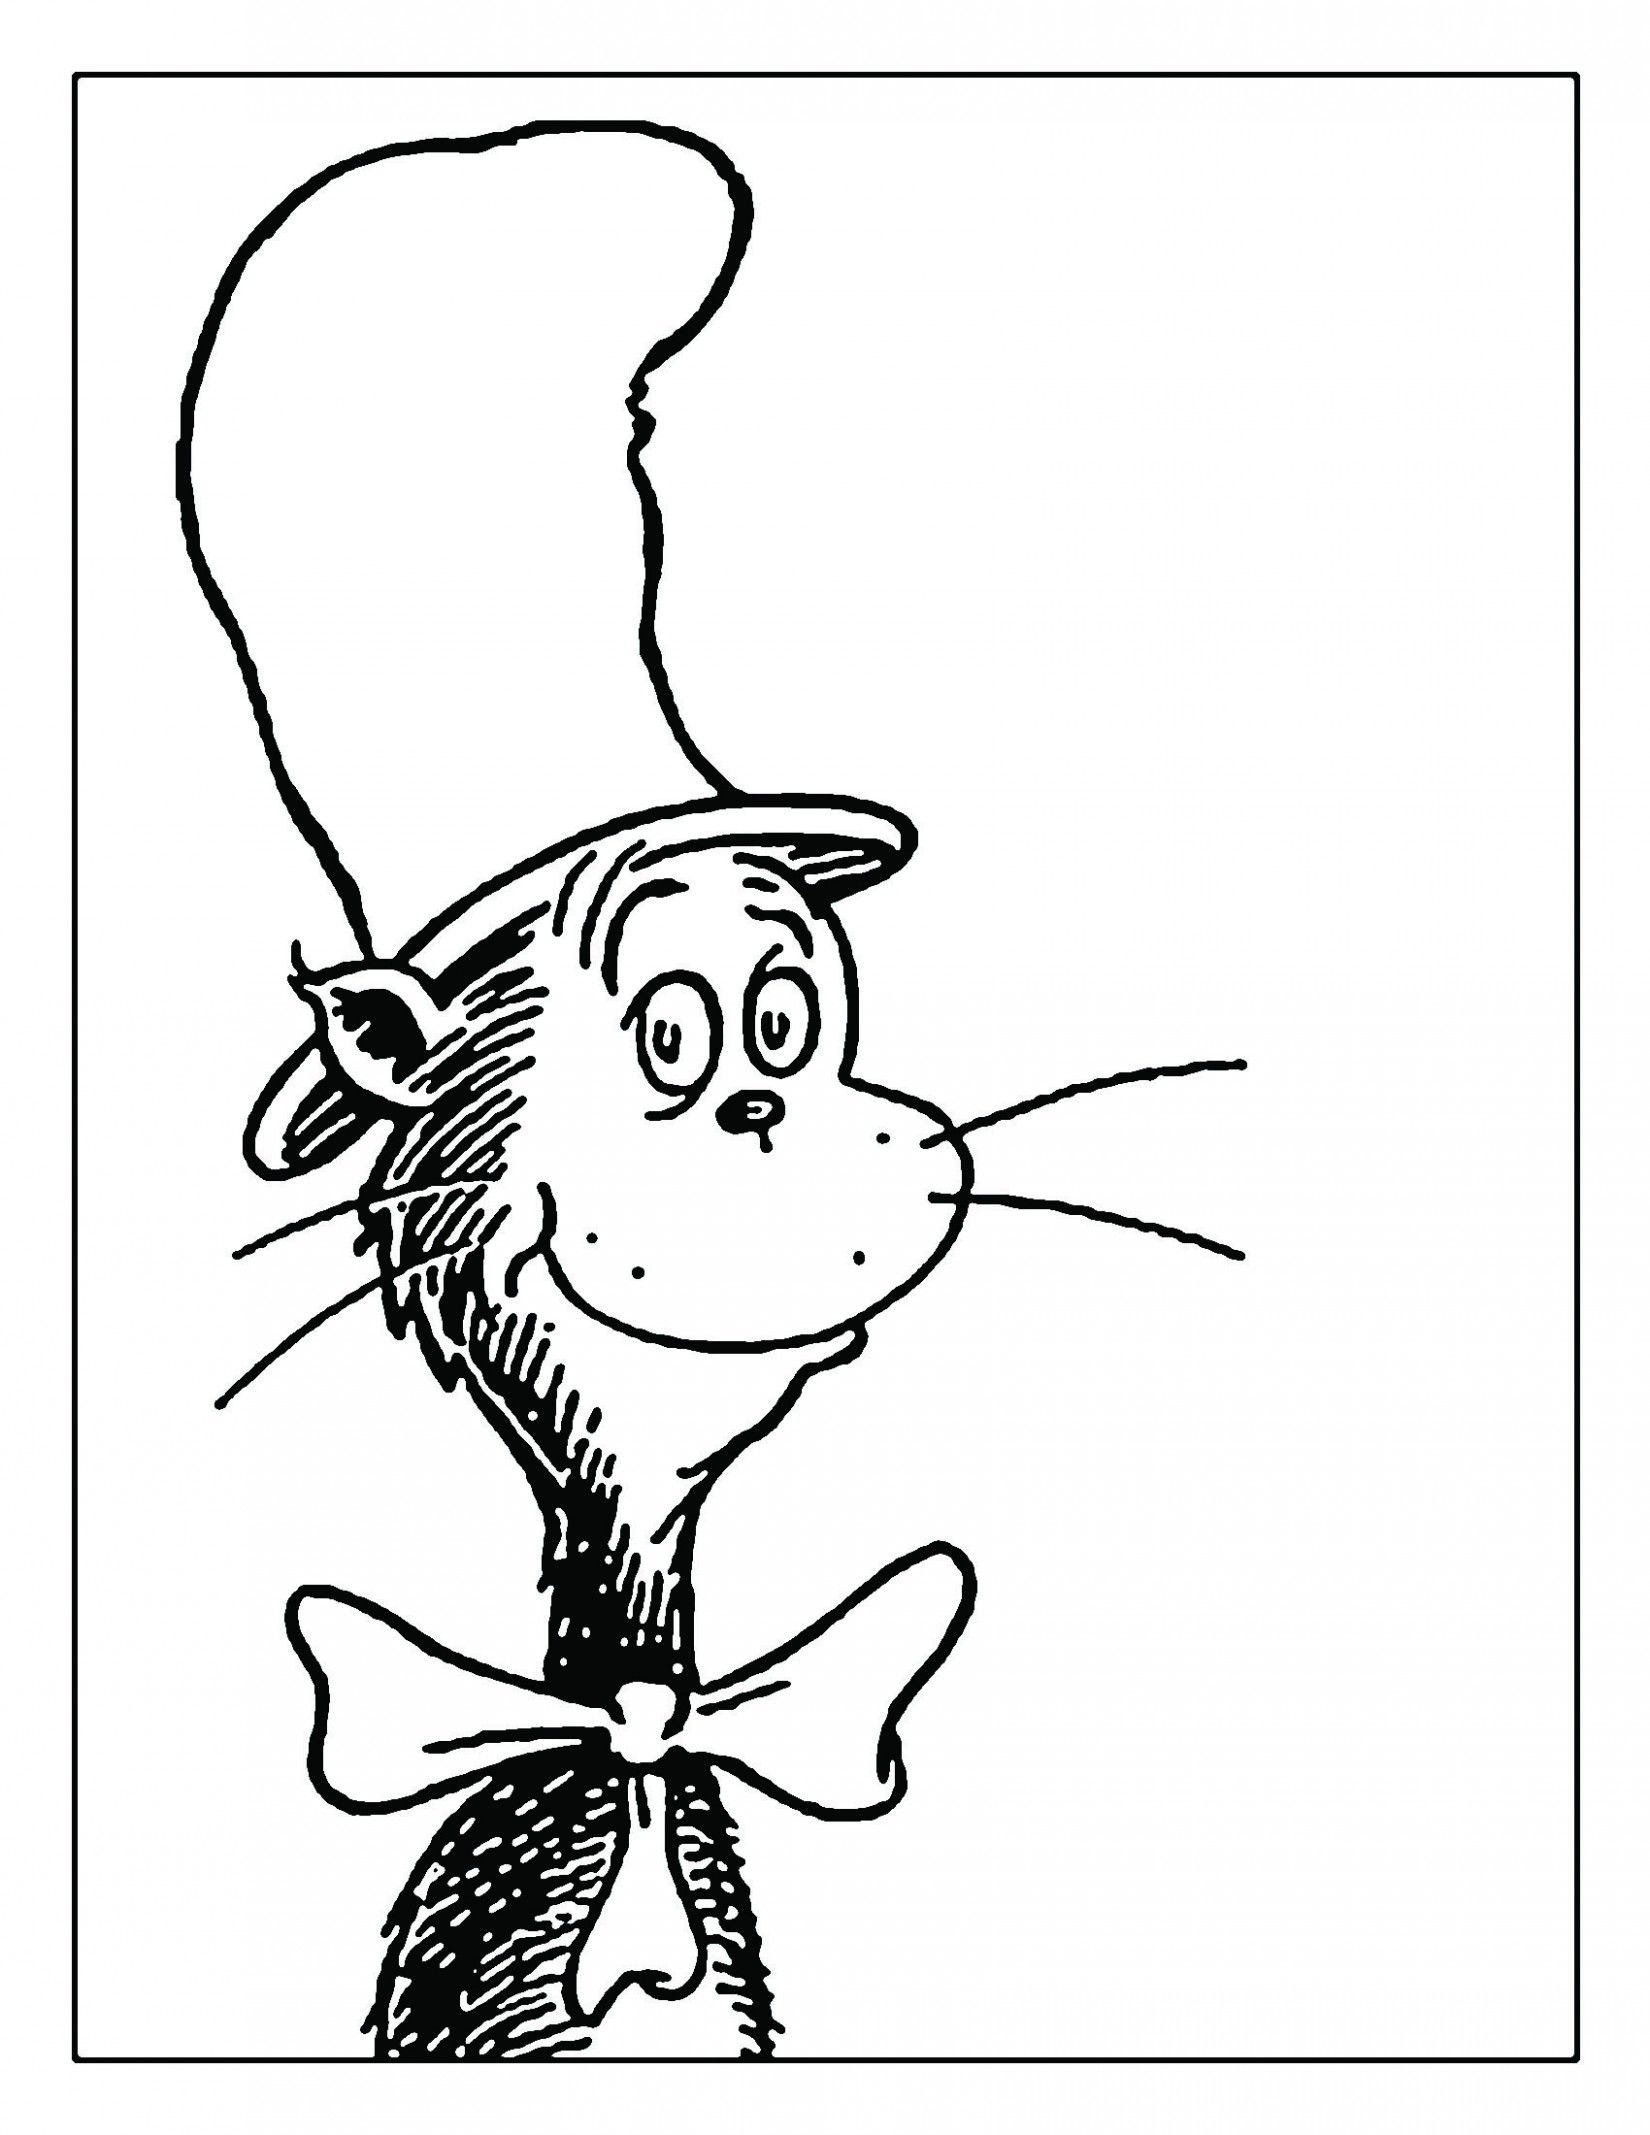 Dr. Seuss Cat In The Hat | -Dr Seuss- | Dr Seuss Coloring Pages, Dr - Free Printable Pictures Of Dr Seuss Characters